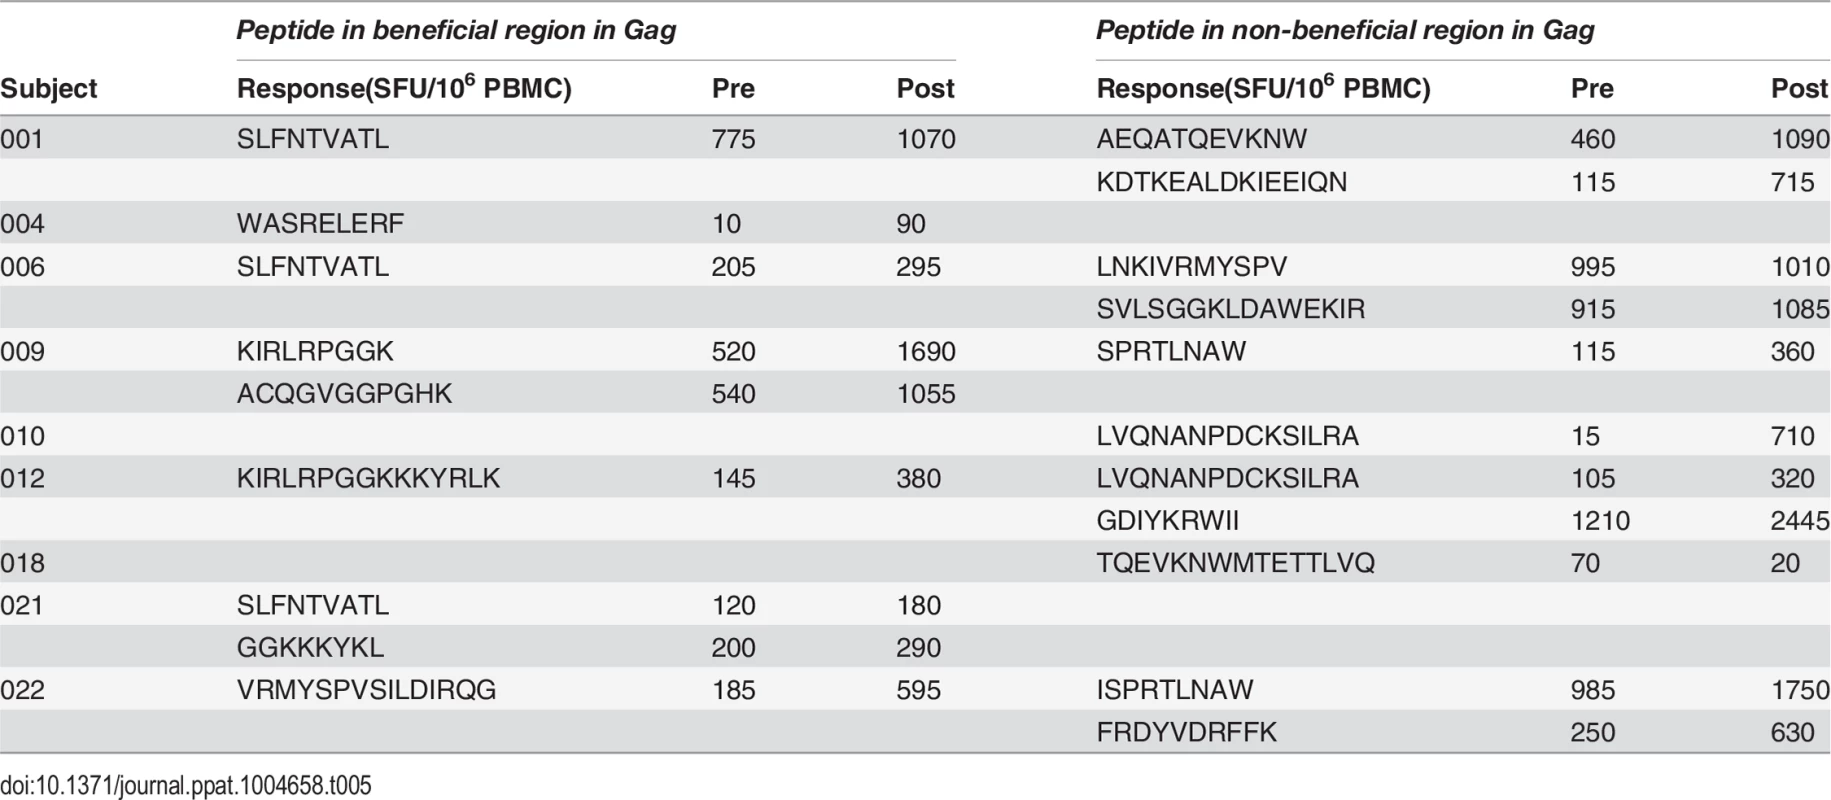 Distribution of responses to Gag peptides in HIV-positive MVA.HIVA vaccinees.